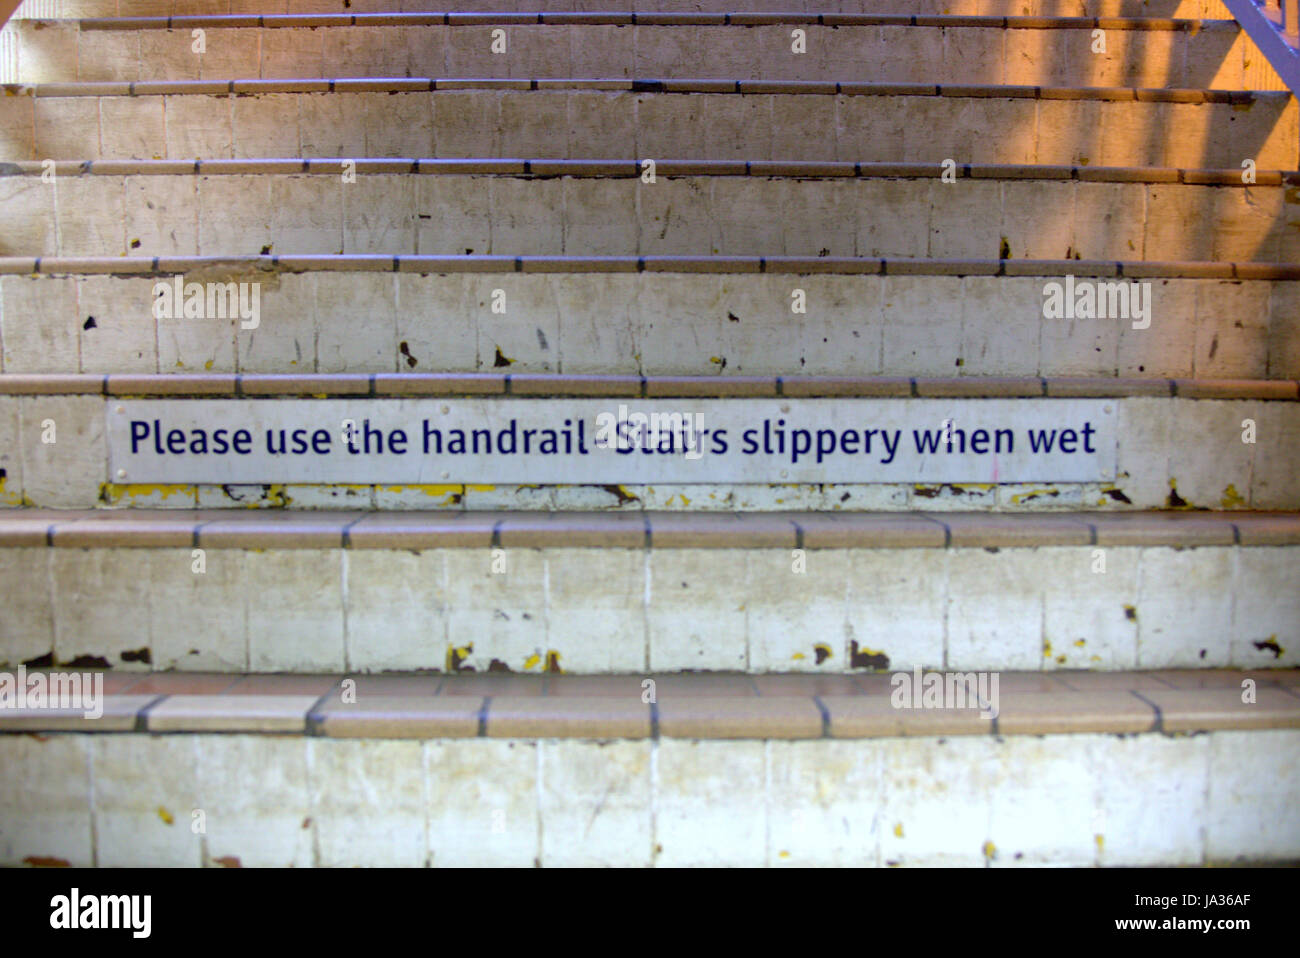 please use handrails stairs slippery when wet sign on stairwell Stock Photo